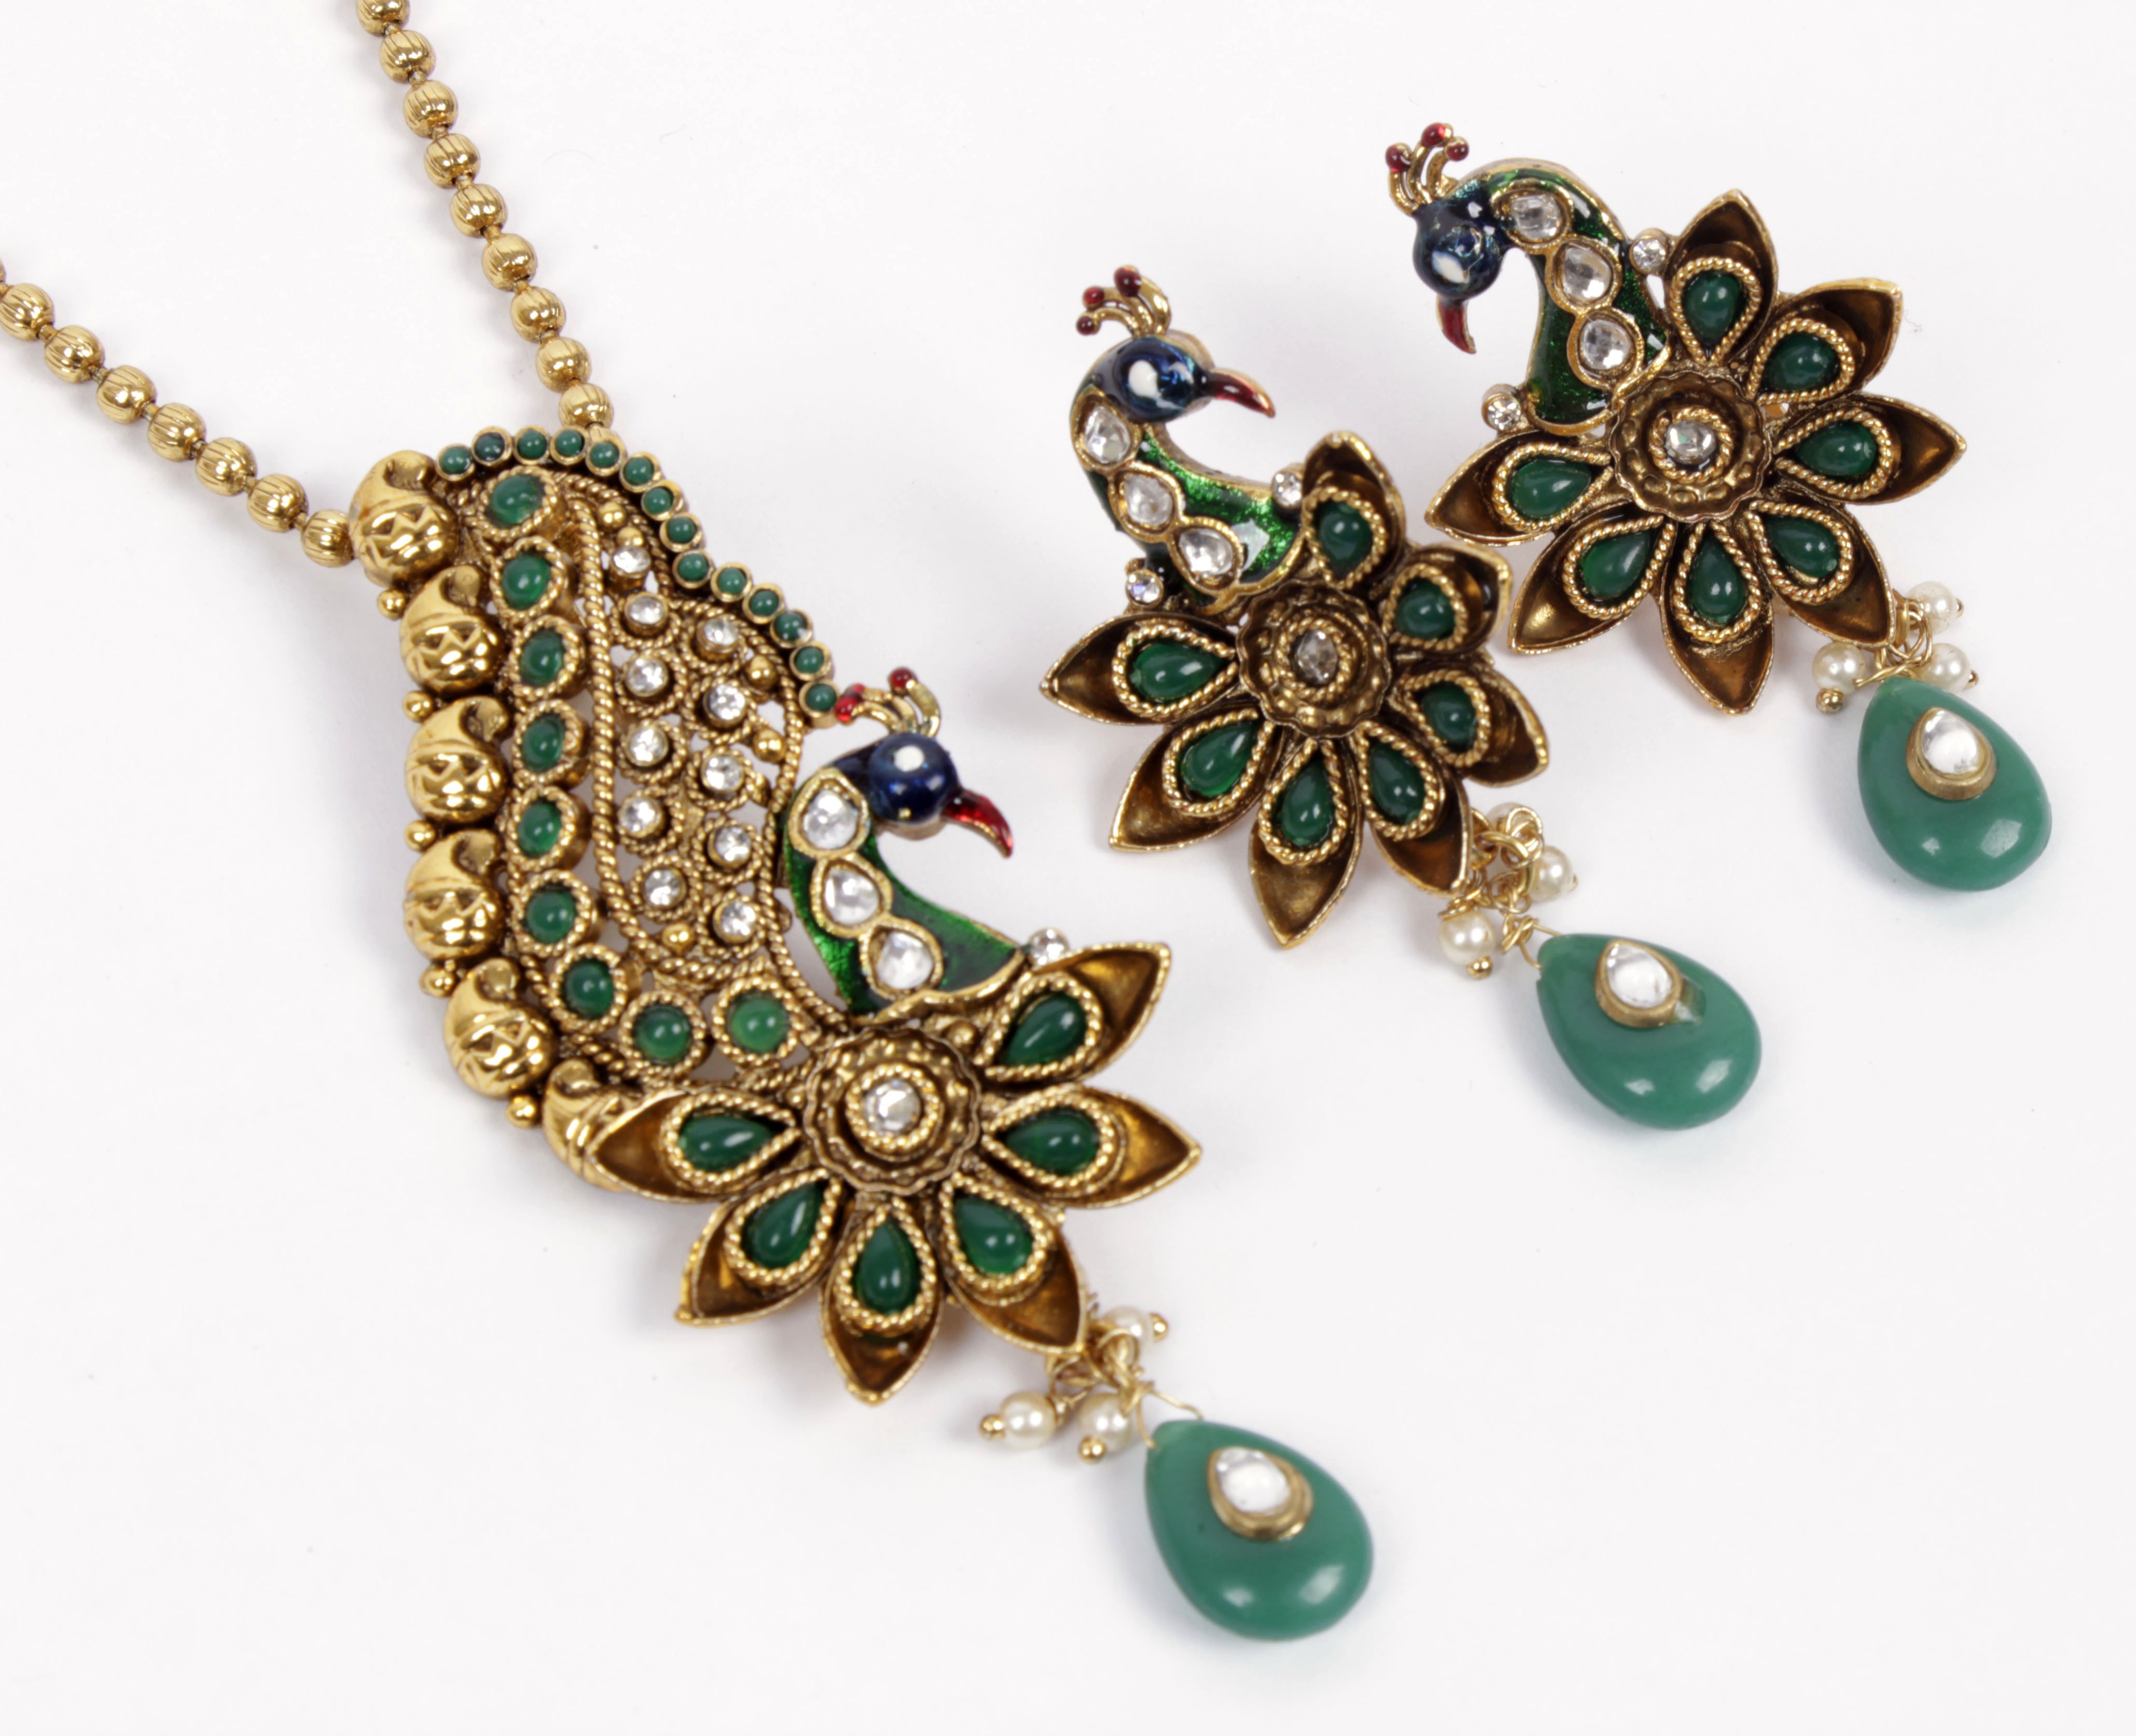 http://s6.picofile.com/file/8198252200/Craftsvilla_Gold_Plated_Antique_Pendant_Set_With_Traditional_Peacock_Design_Stone_Work_B33_30184834_d0f16847_a7e6_42e2_8d98_816b4000bfb5_jpg.jpg